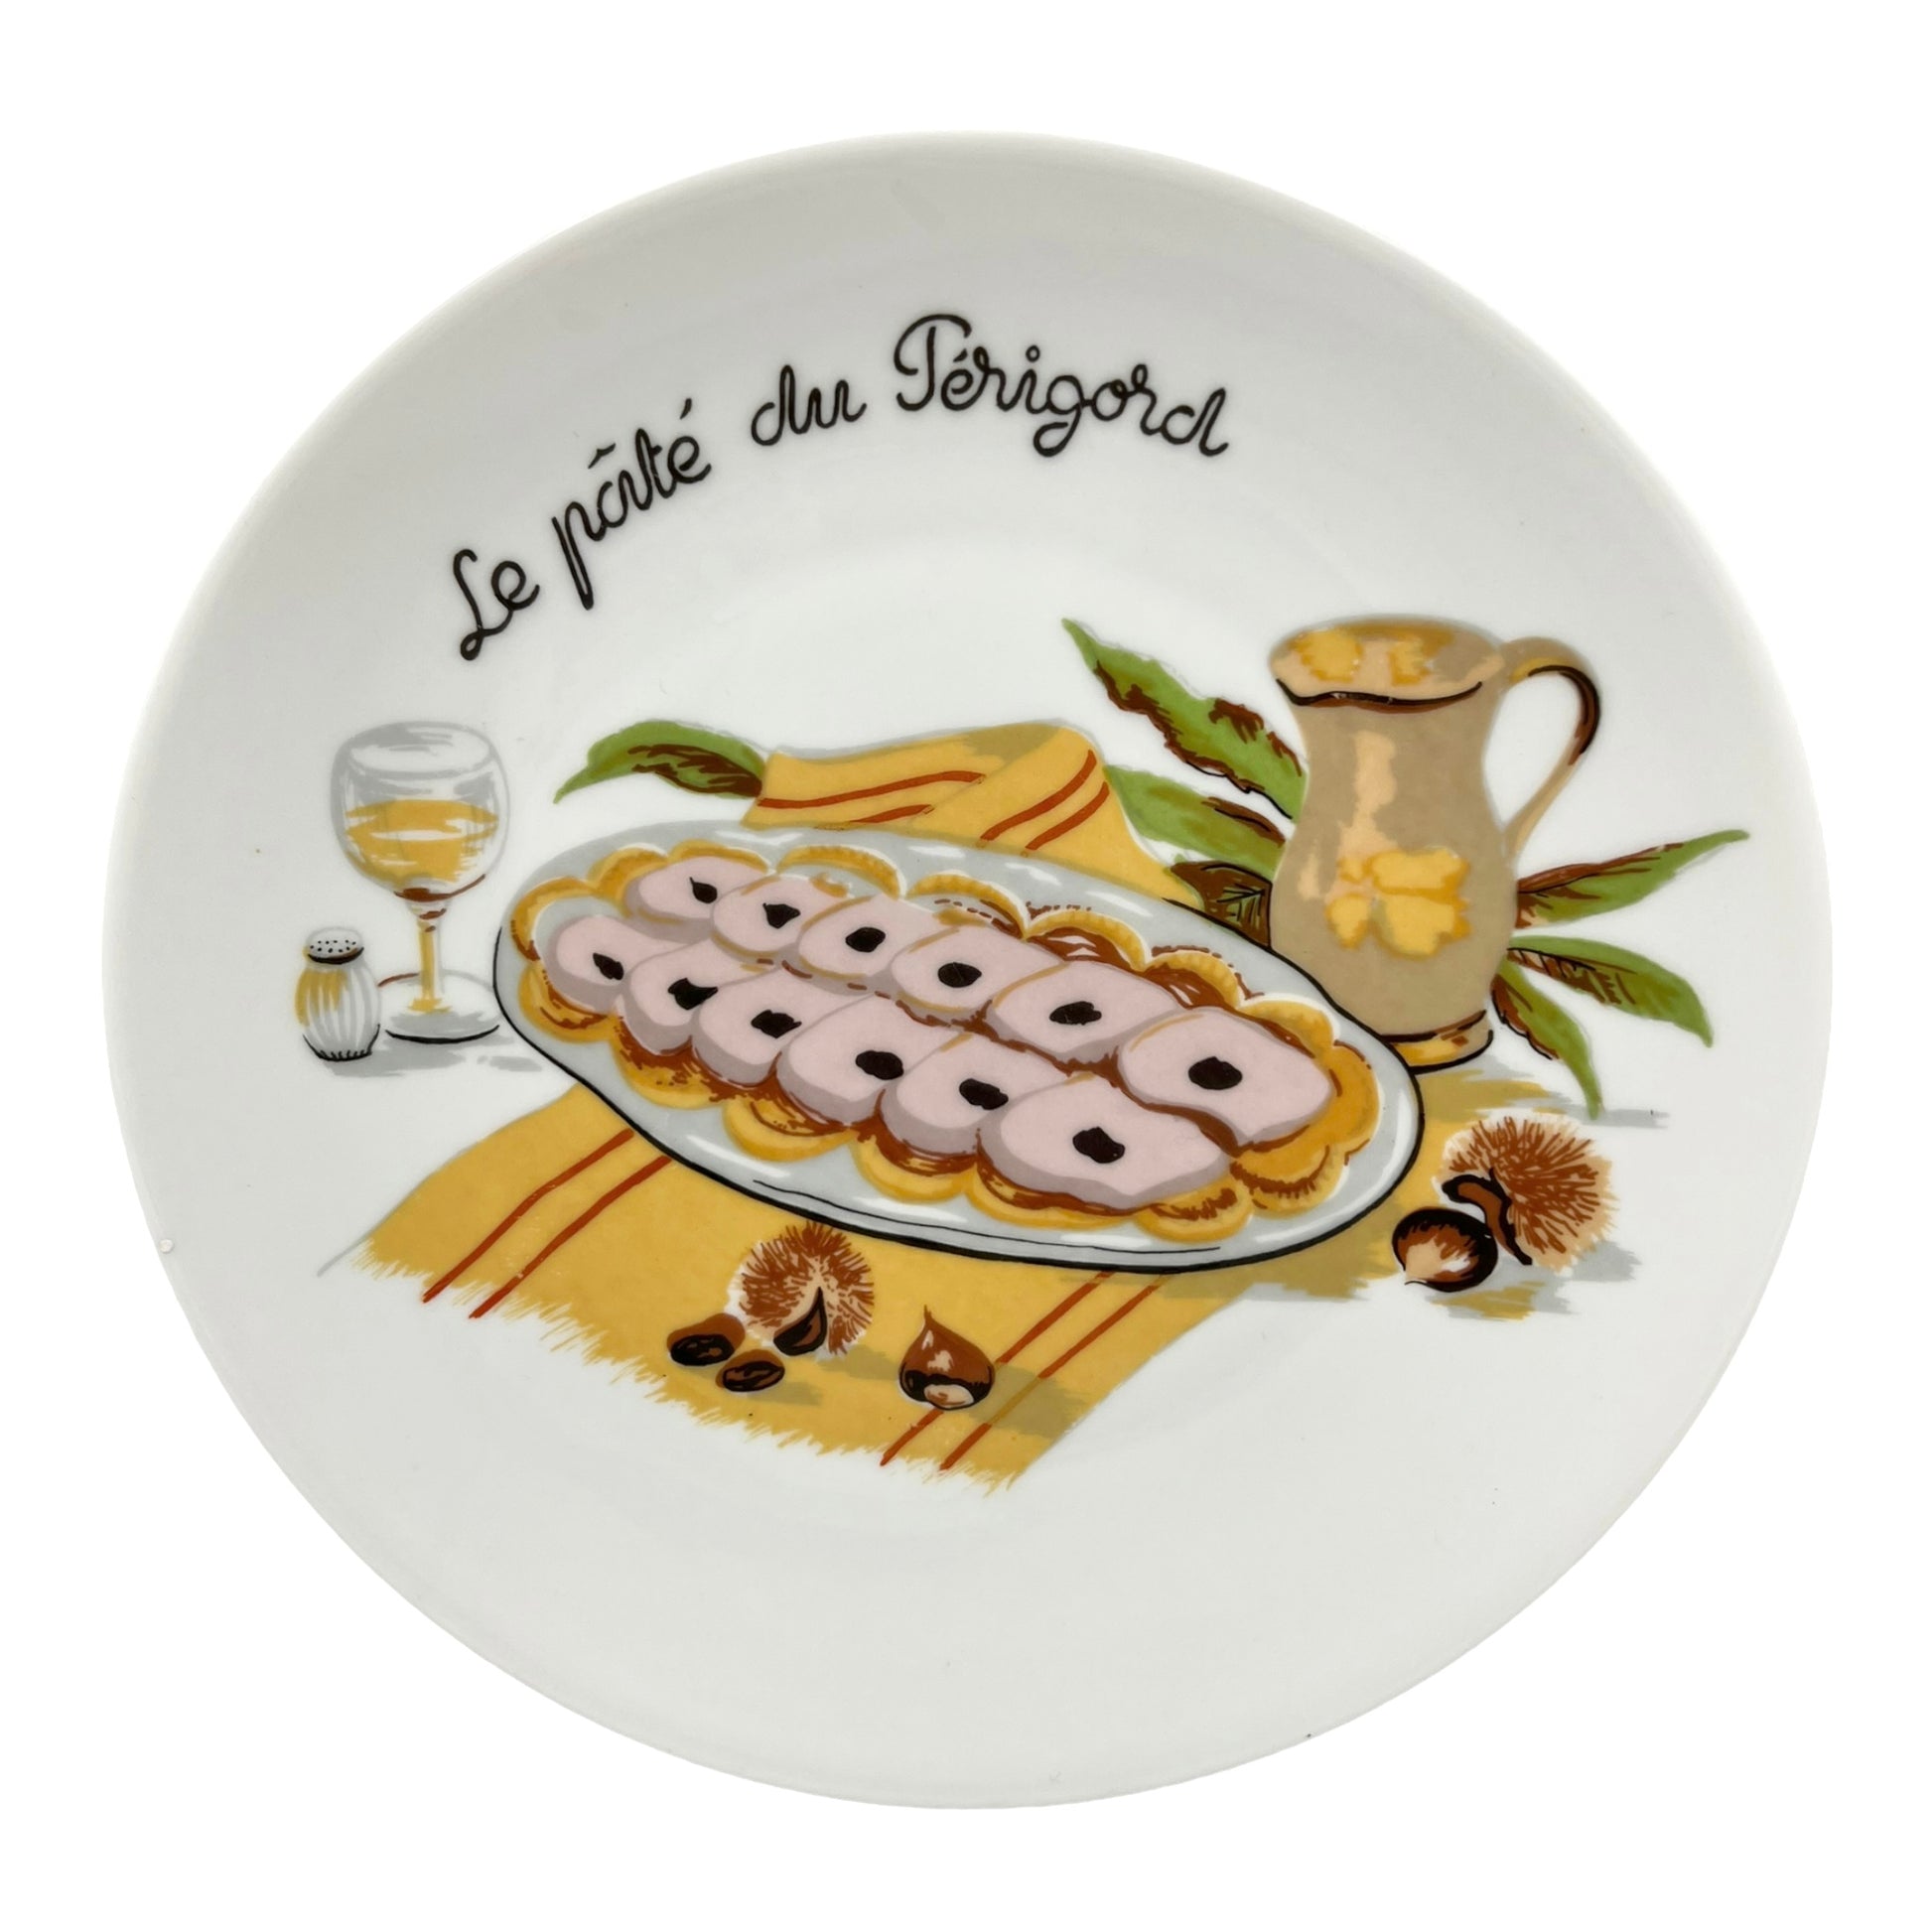 French pate terrine plate set with 3 different designs  sold by All Things French Store